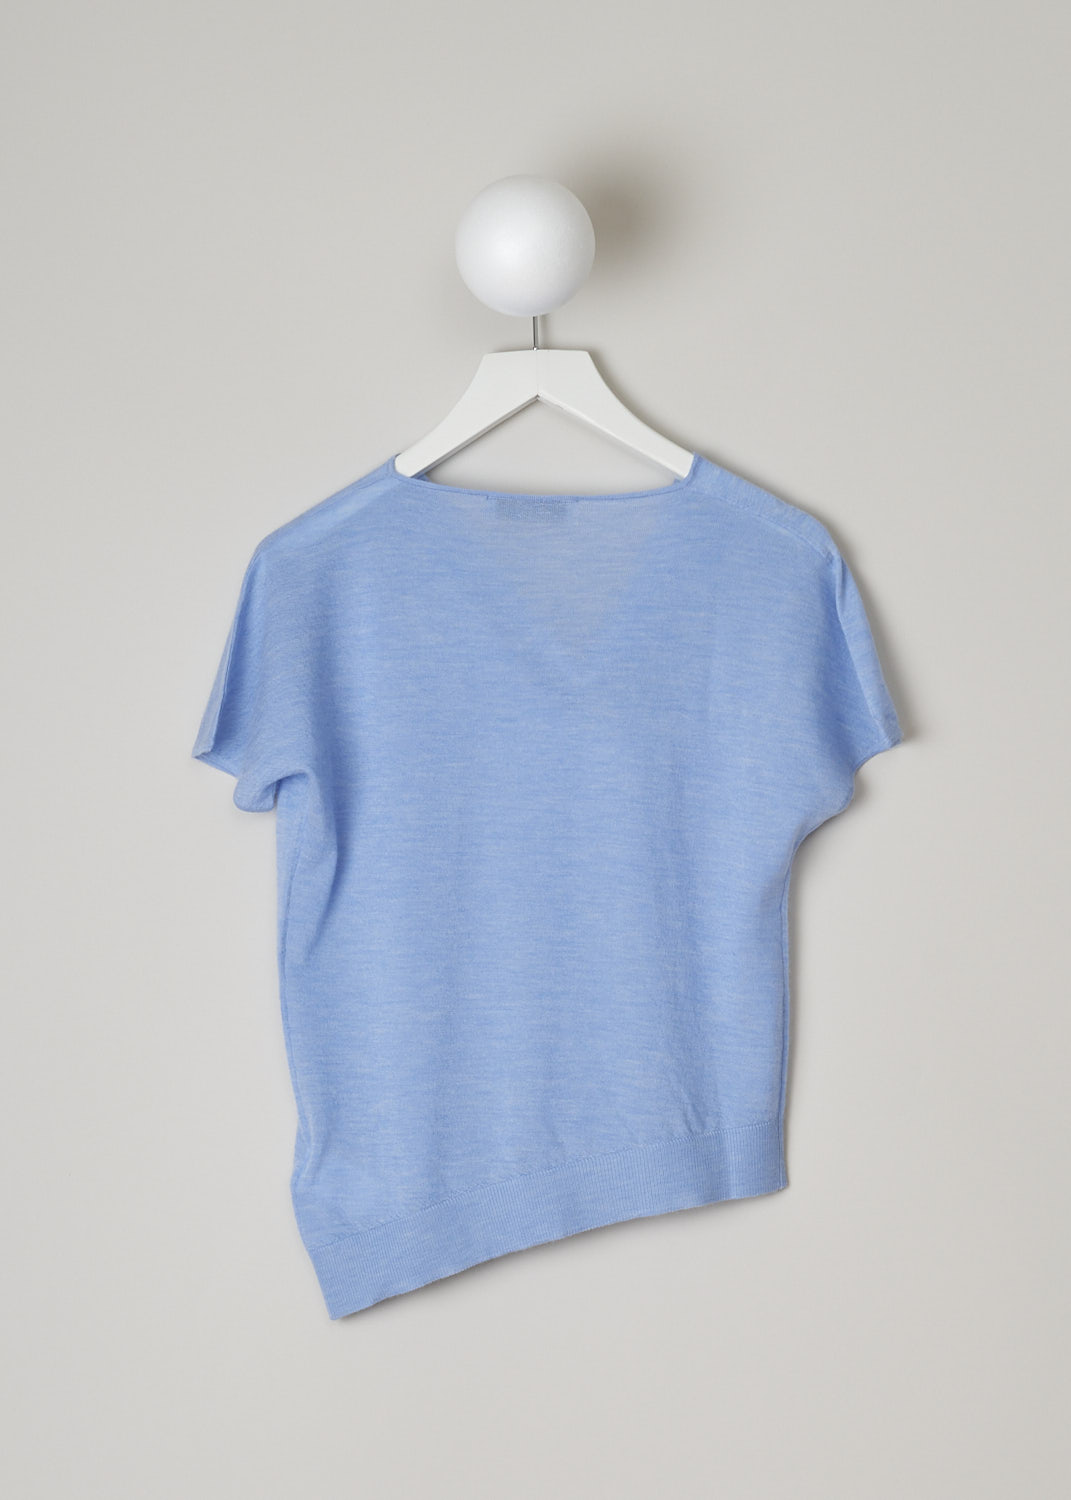 PRINGLE OF SCOTLAND, LIGHT BLUE CASHMERE TOP, WTE018_2885_LIGHT_BLUE_MELANGE, Blue, Back, This light blue cashmere top has a cowl neck and short cap sleeve. The top has a ribbed, asymmetric hemline. 
